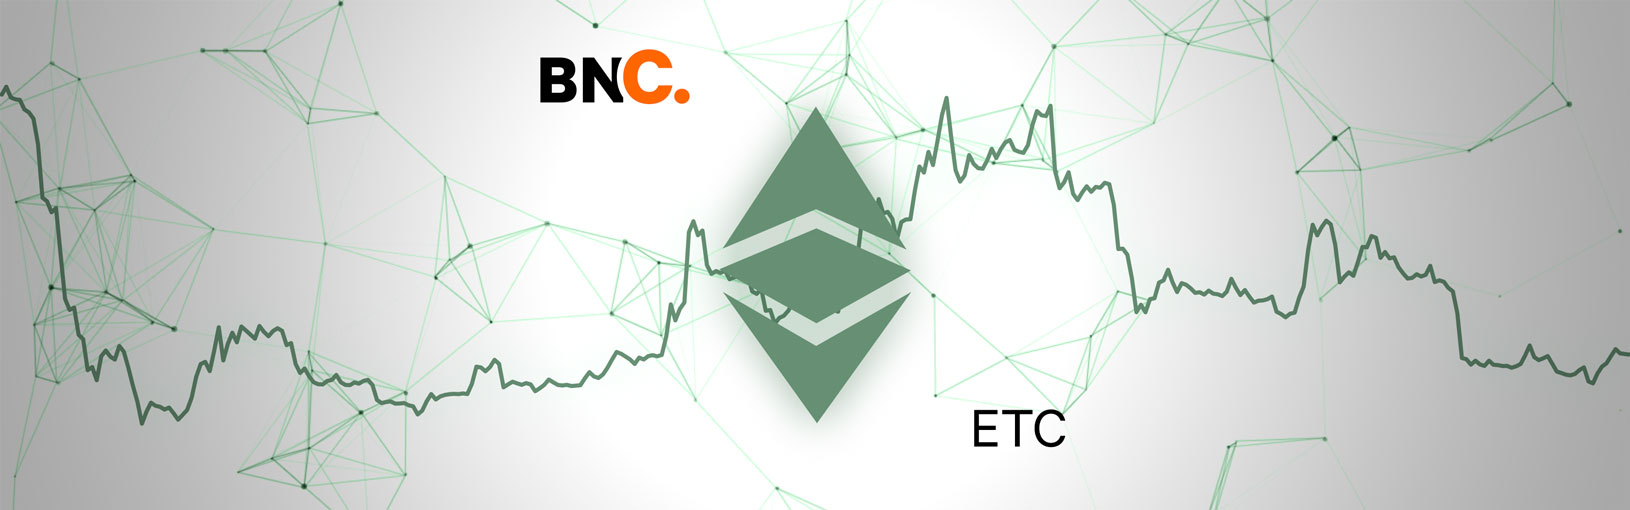 Etc Difficulty Chart